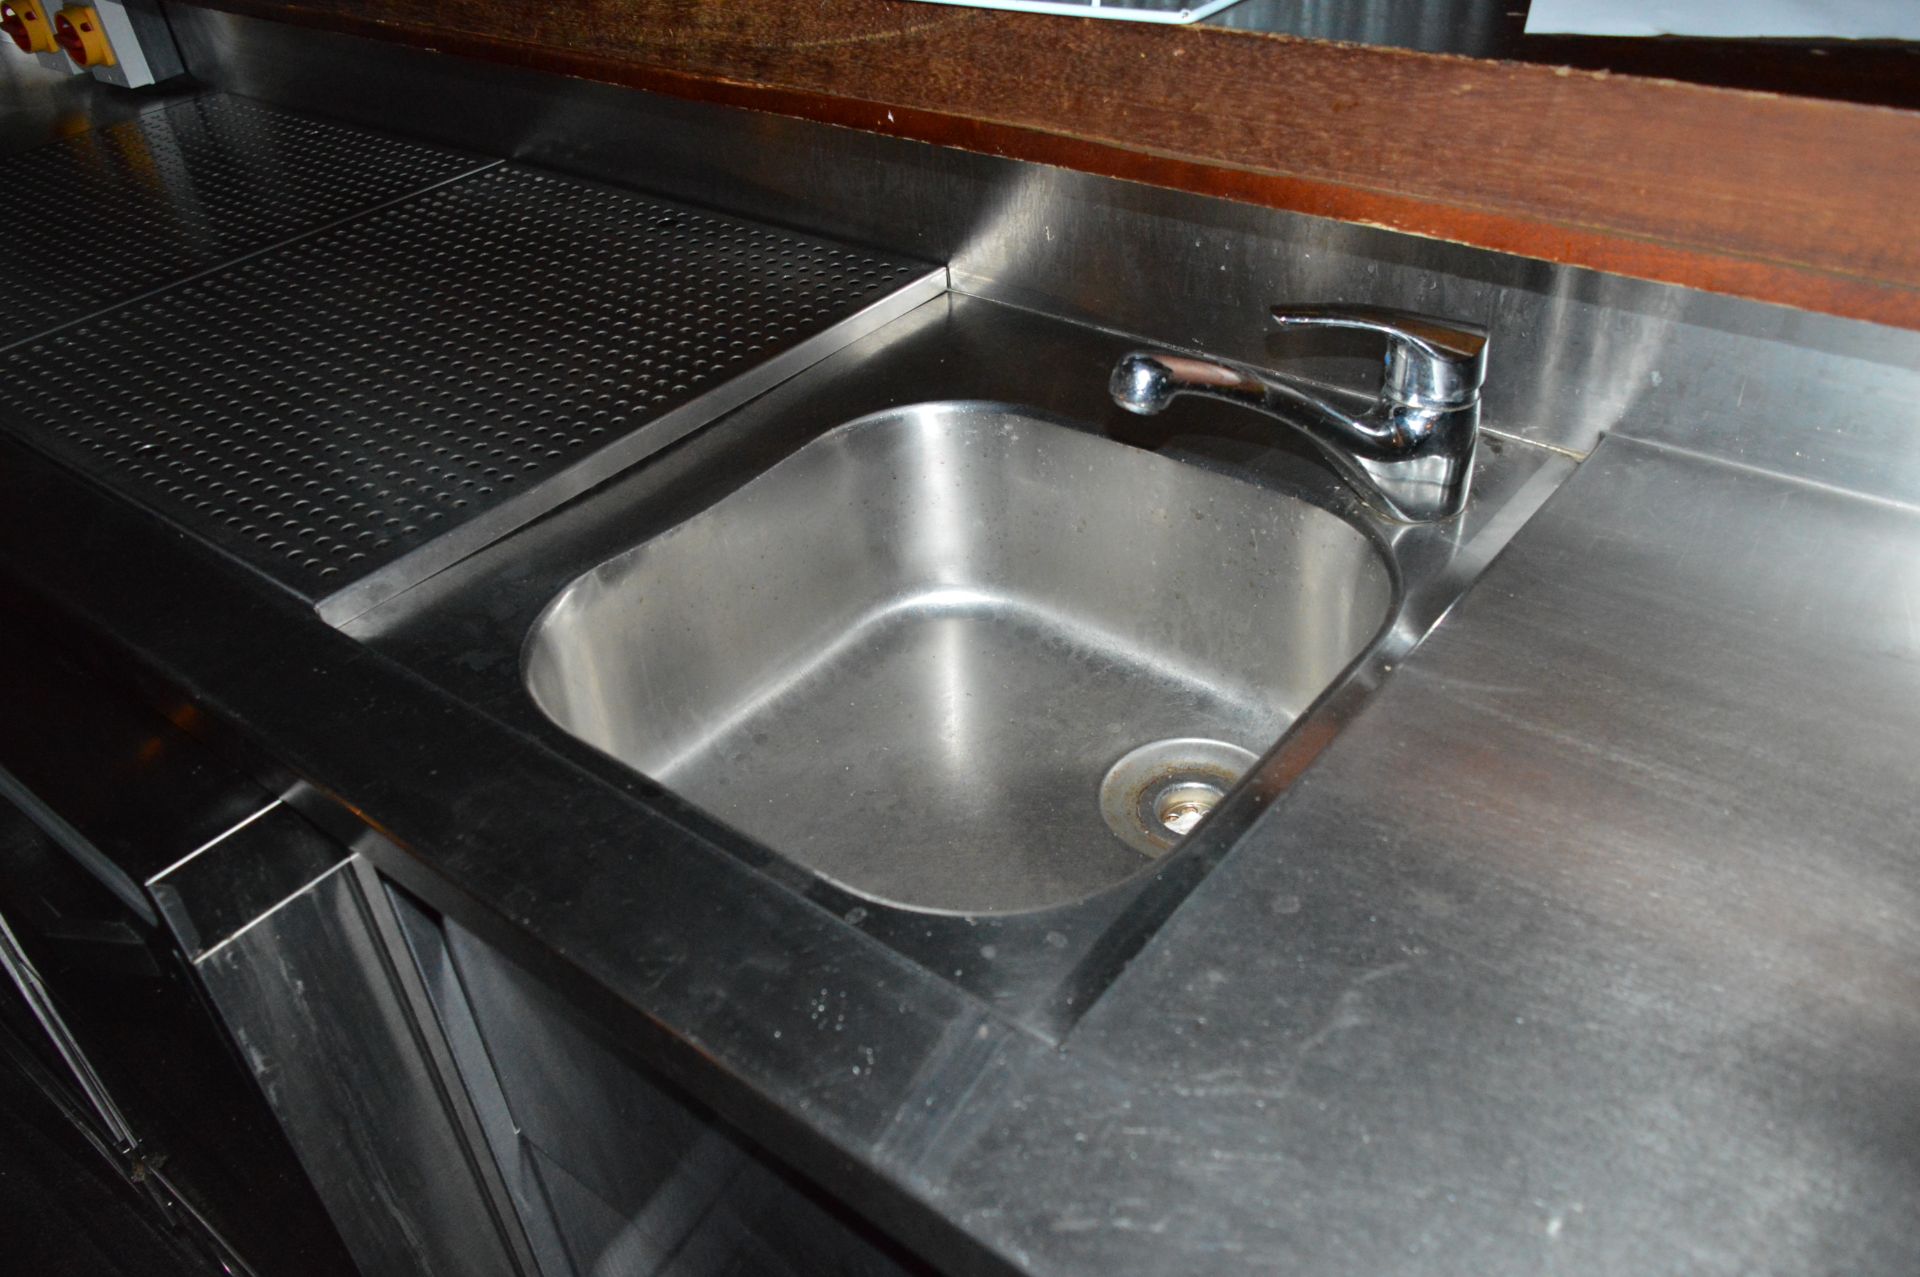 1 x Stainless Steel Bar Server Unit With Wash Basins - More Info to Follow - CL350 - Ref In2-060 - - Image 11 of 11